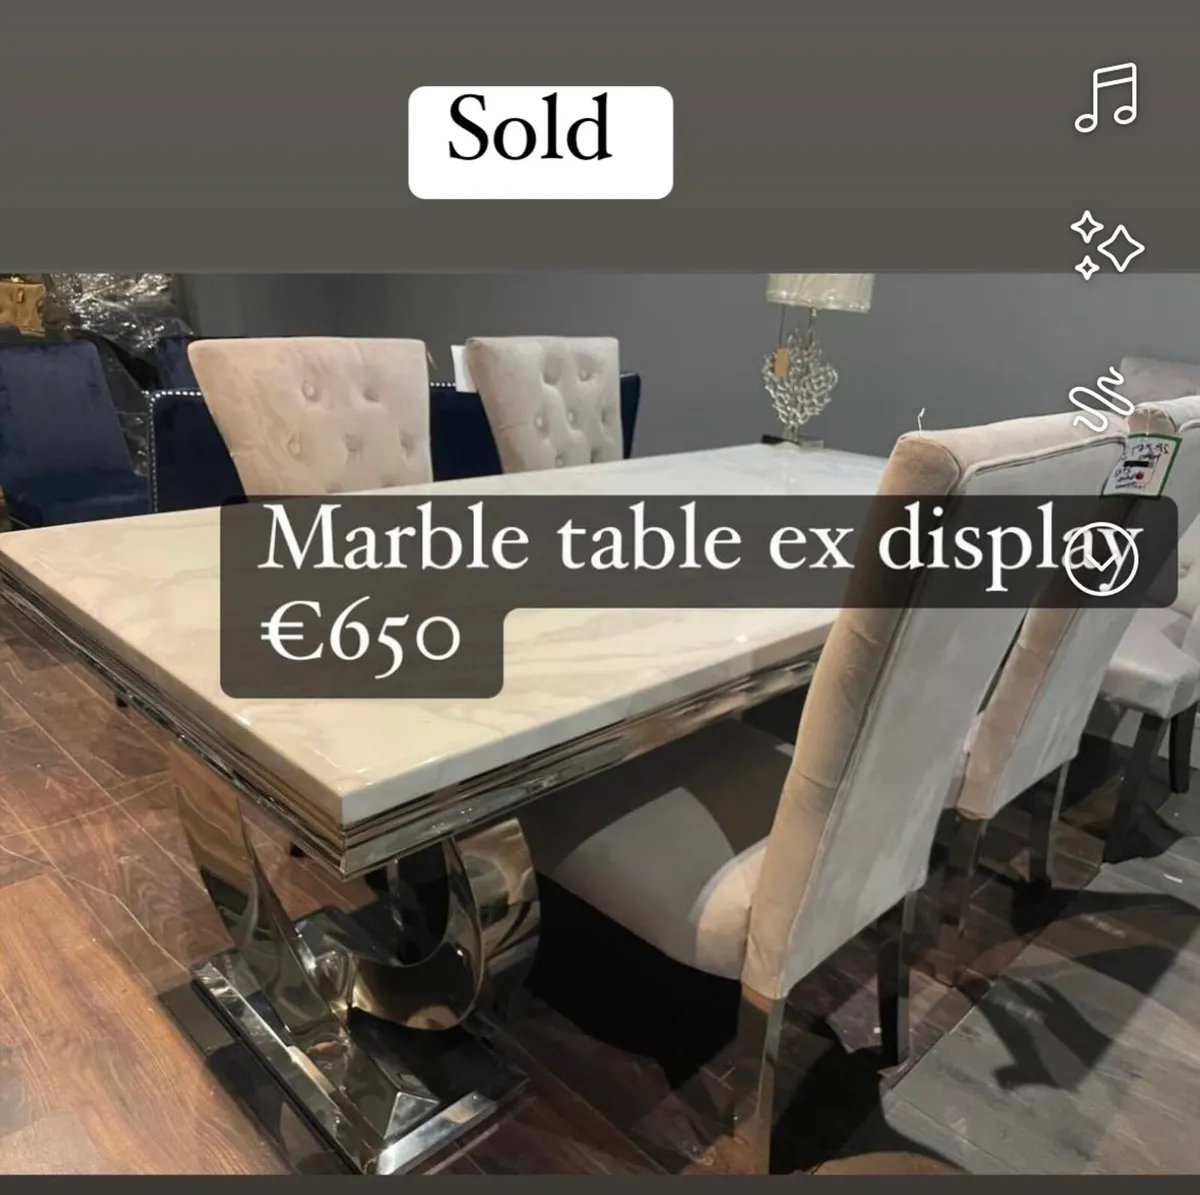 Warehouse Sale of furniture  tables or chairs etc